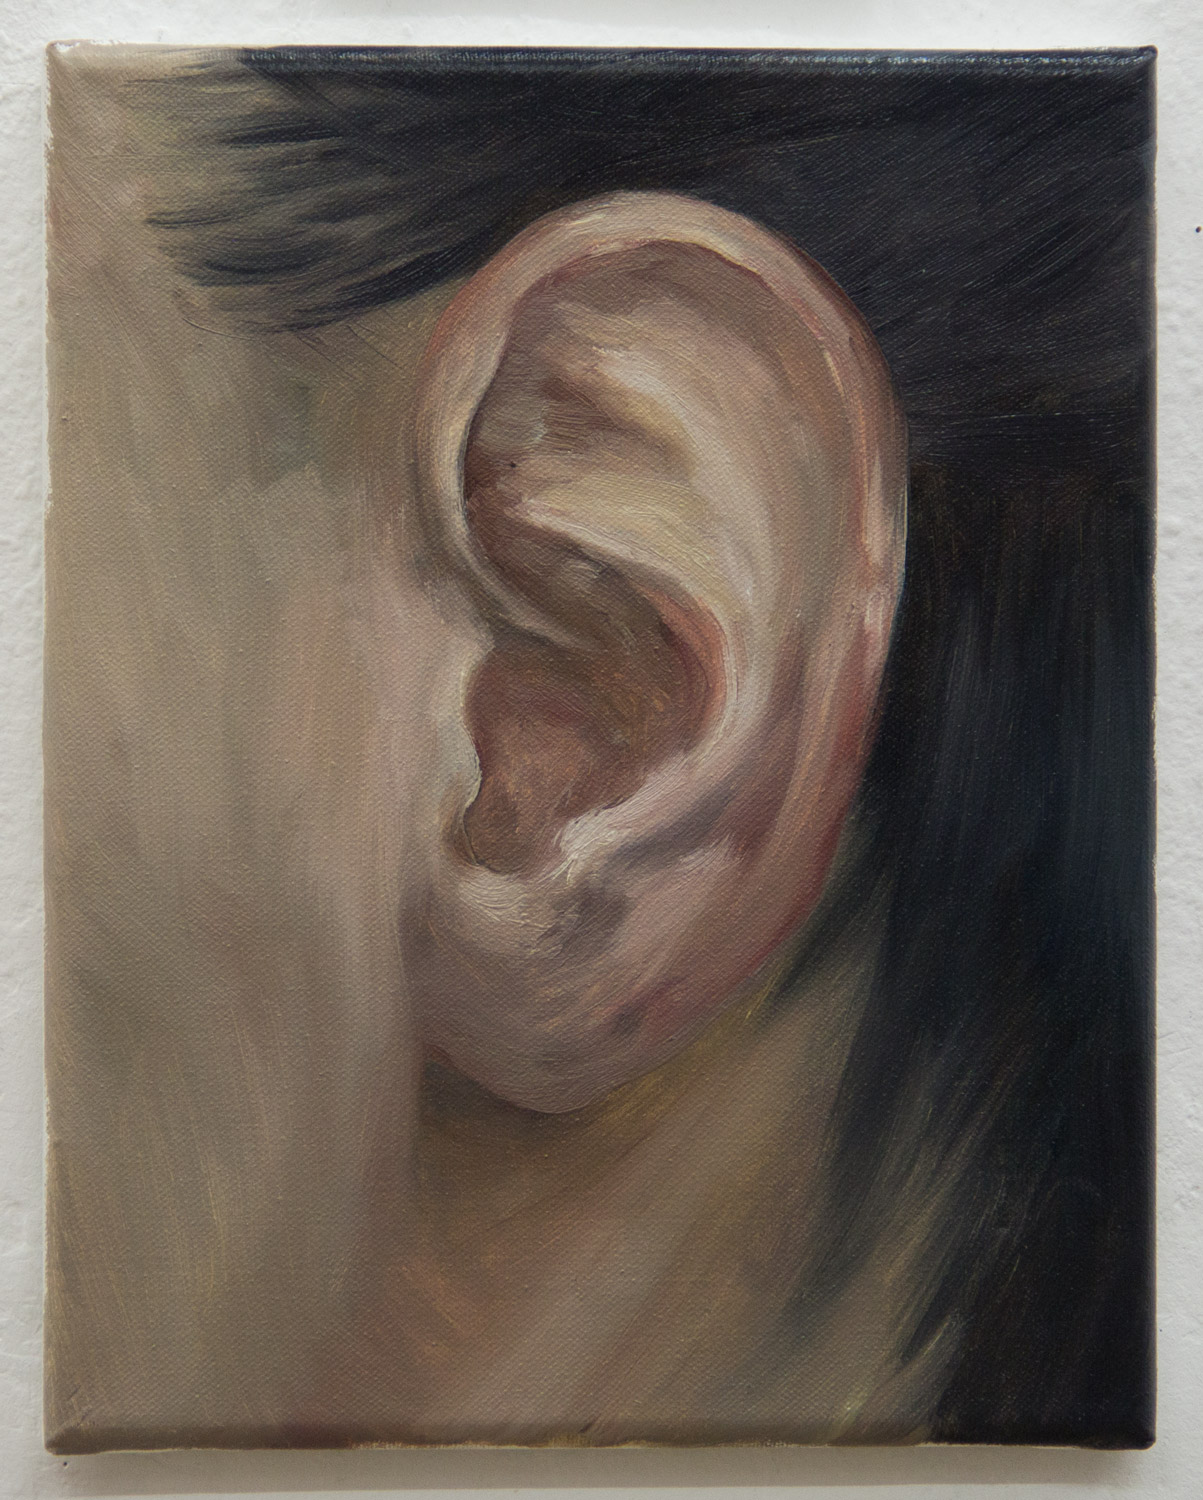 From the "Ear Collection"; 24 x 30 cm; oil on canvas; 2019